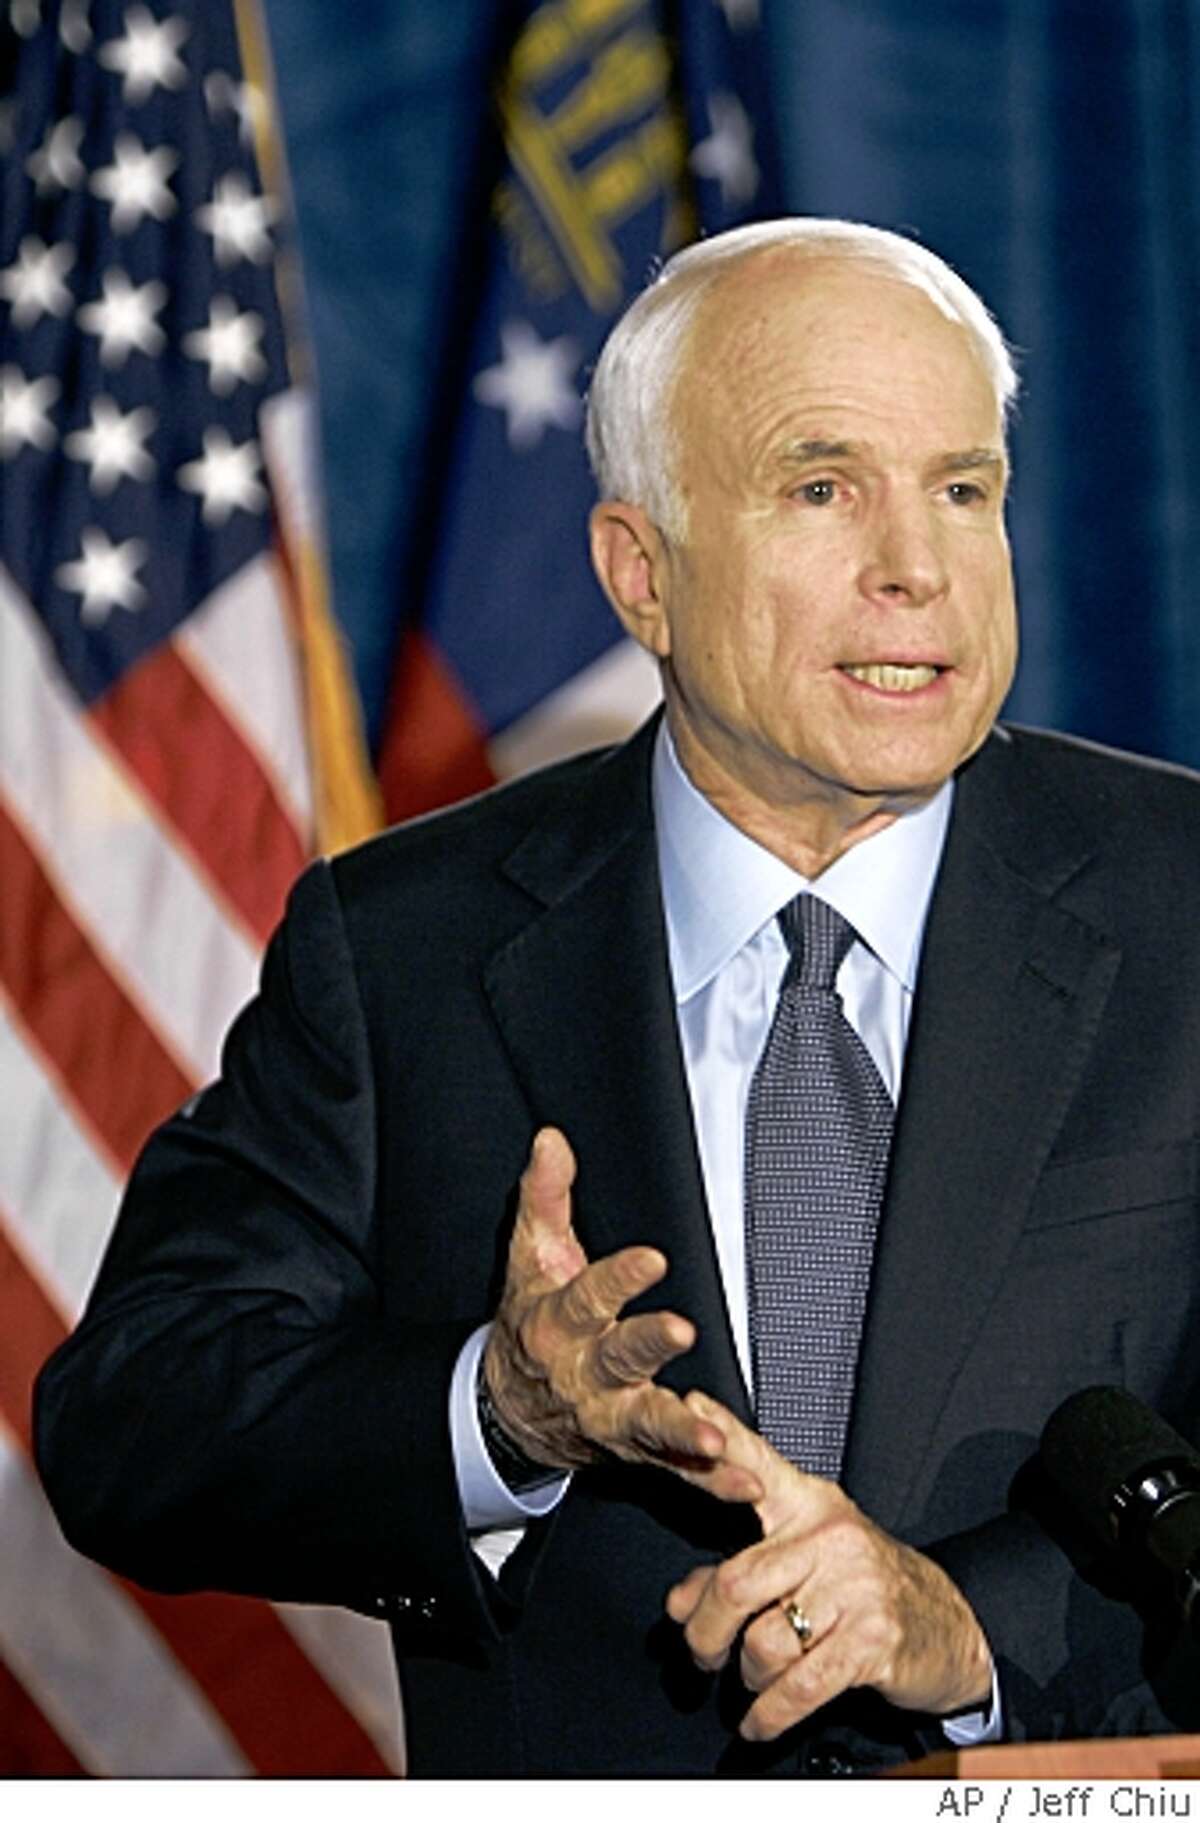 Republican presidential candidate, Sen. John McCain, R-Ariz., speaks with reporters during a news conference on Monday, May 19, 2008, in Savannah, Ga. (AP Photo/Jeff Chiu)